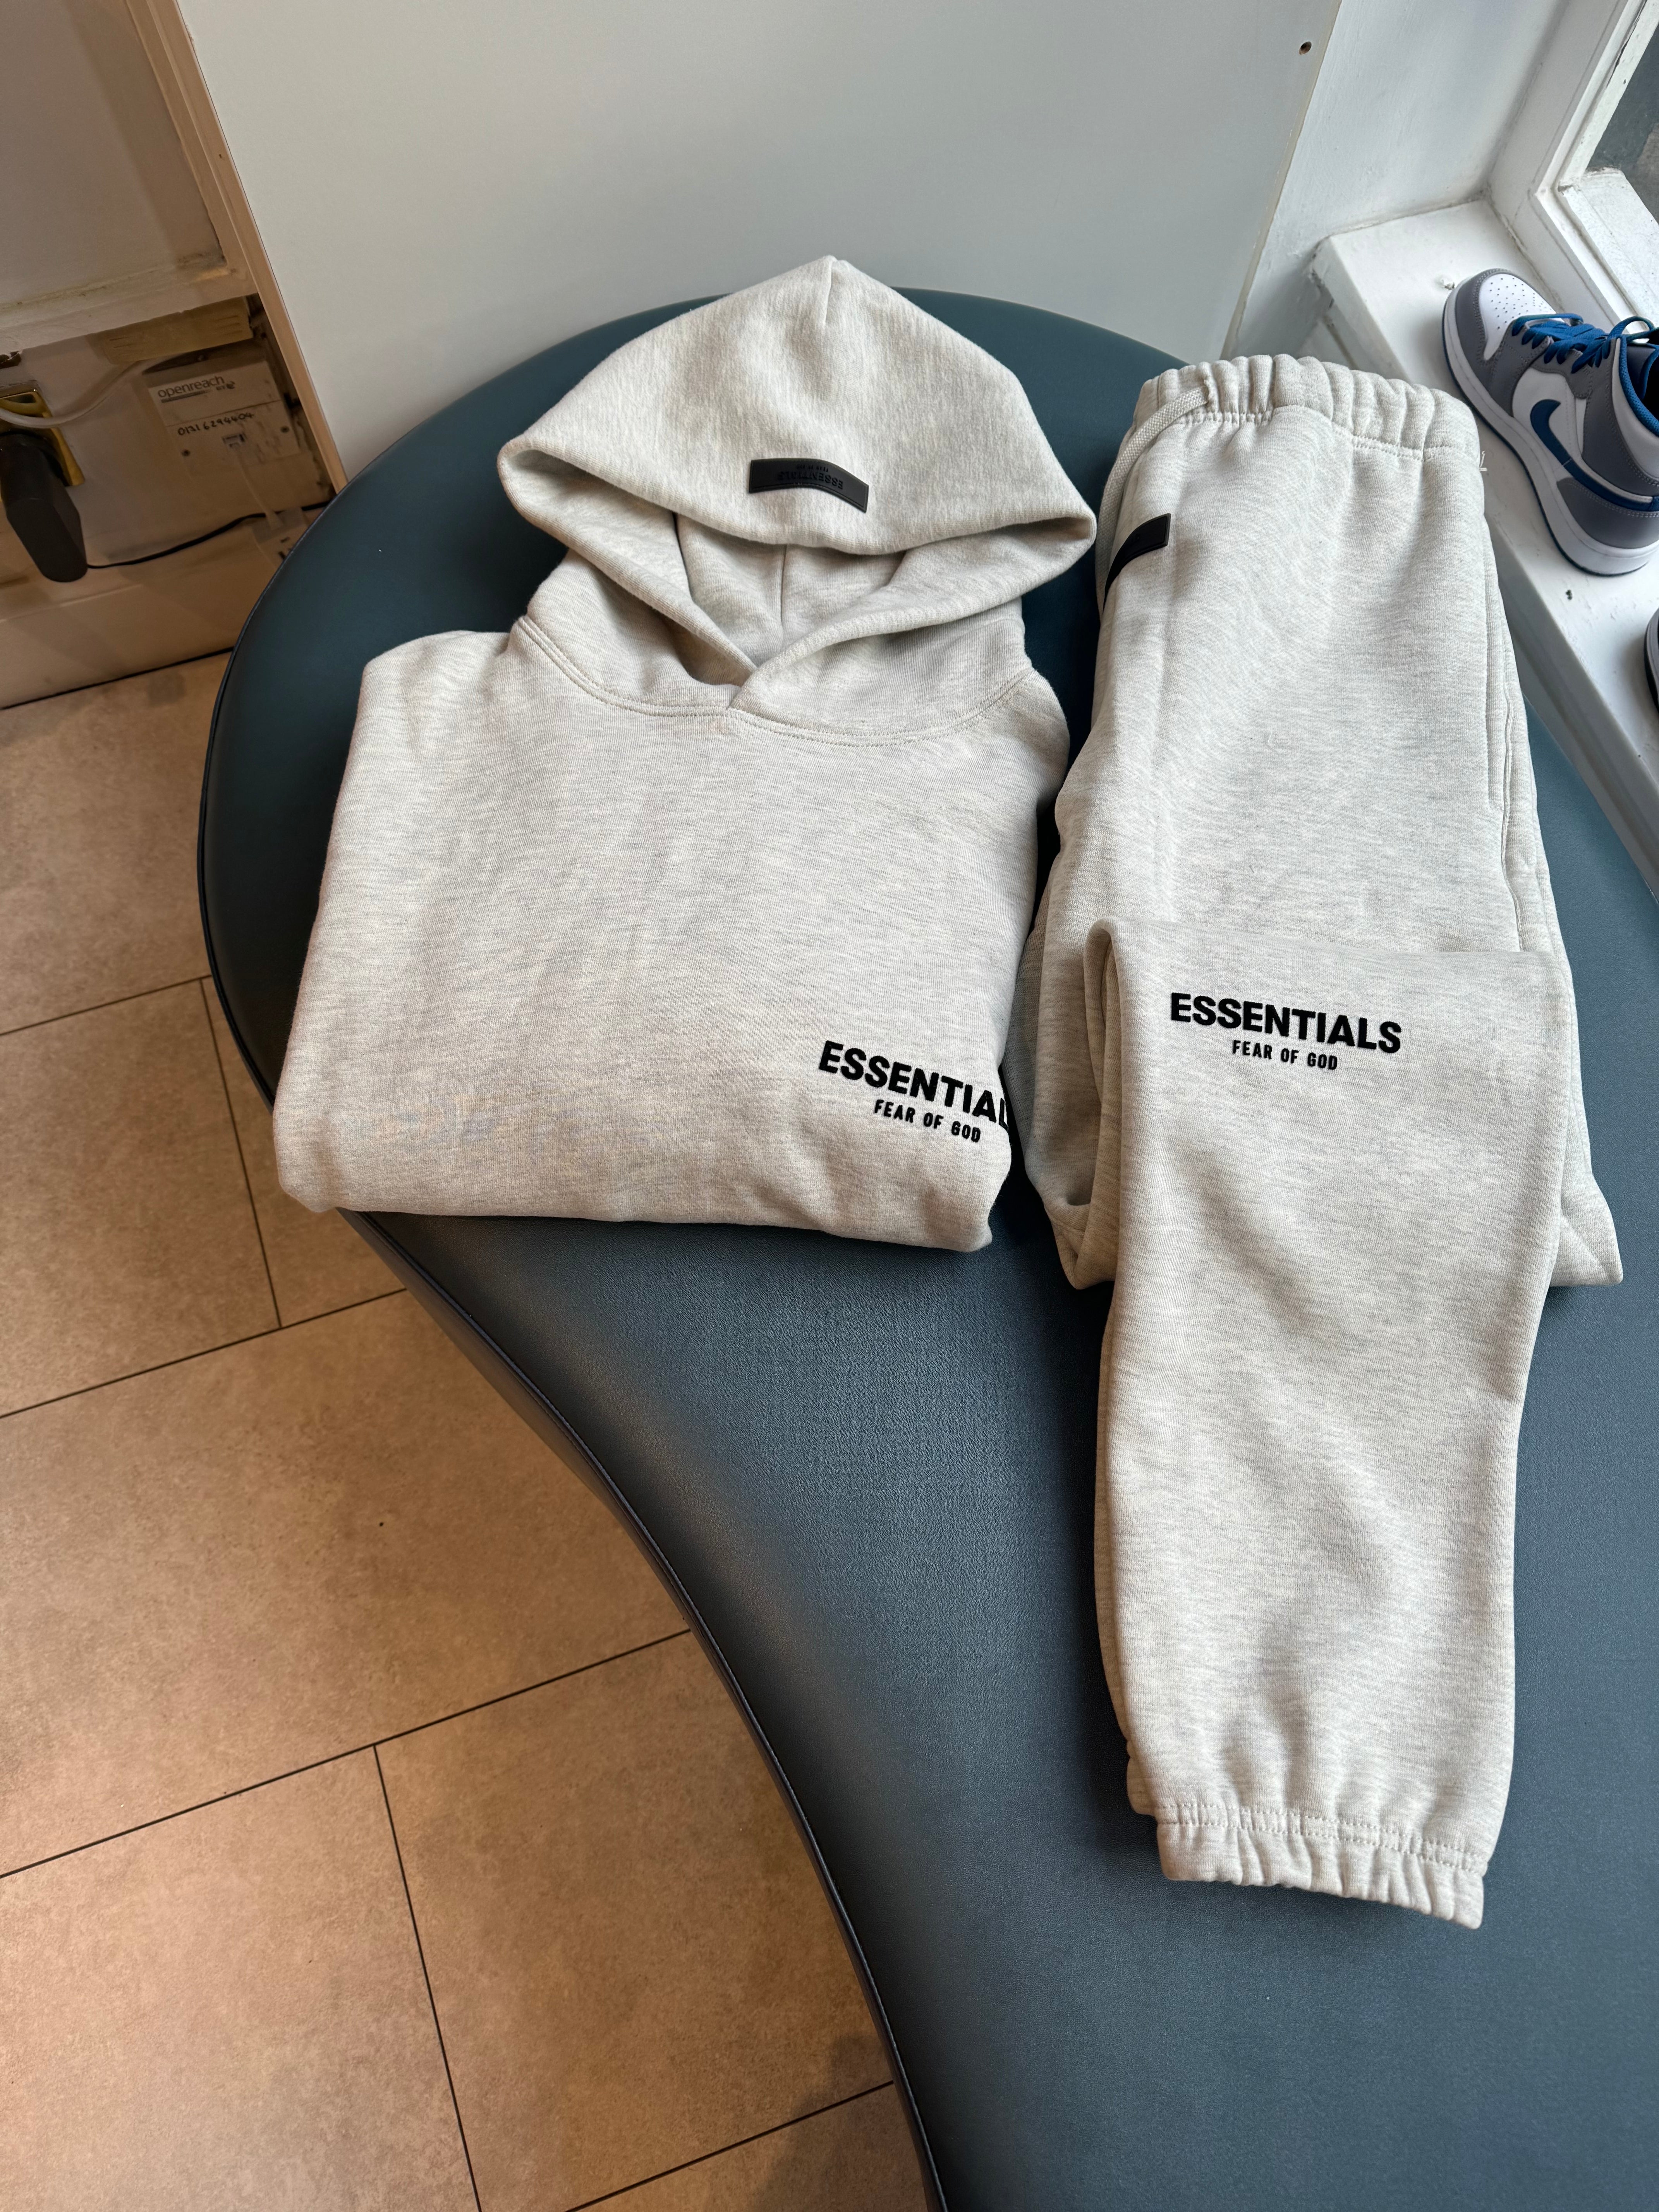 Fear of God Essentials Tracksuit 'Light Oatmeal' (SS22)